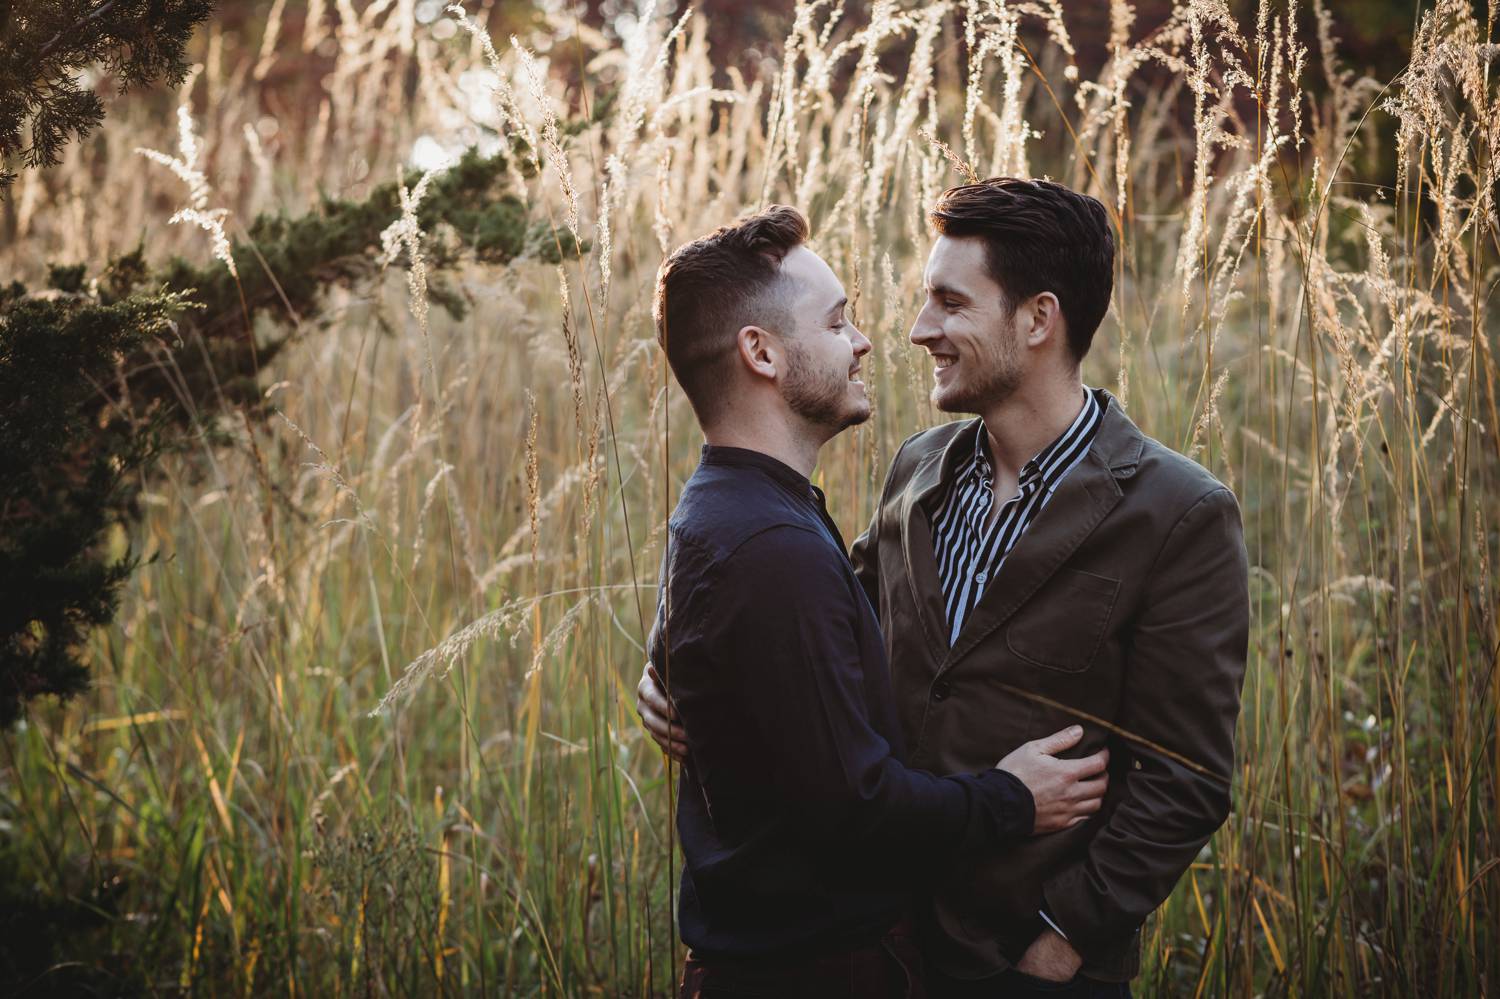 Two men pose for engagement photos in a grassy field